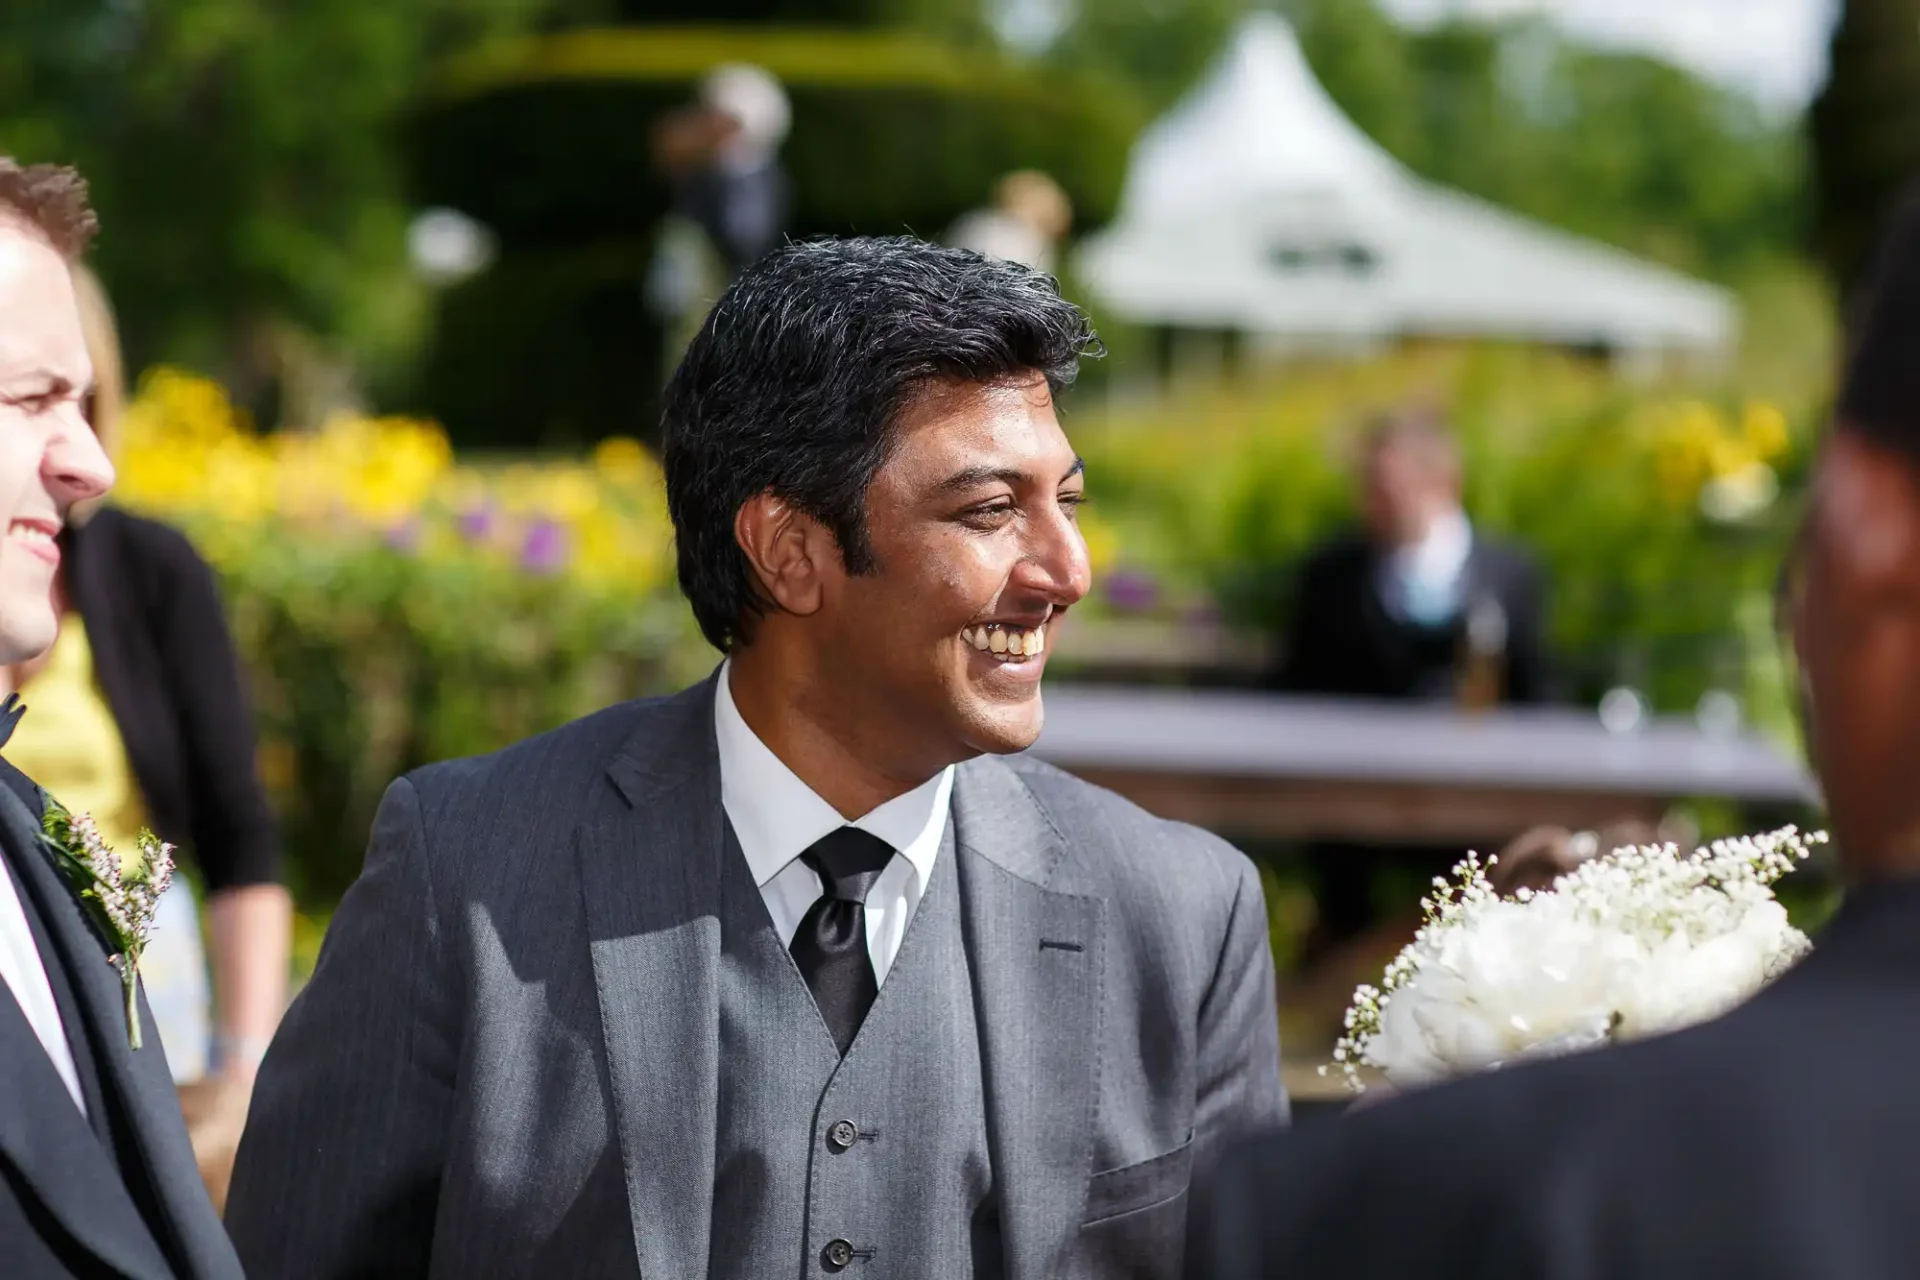 A man in a gray suit smiling at a social gathering outdoors, surrounded by lush greenery and bright flowers.